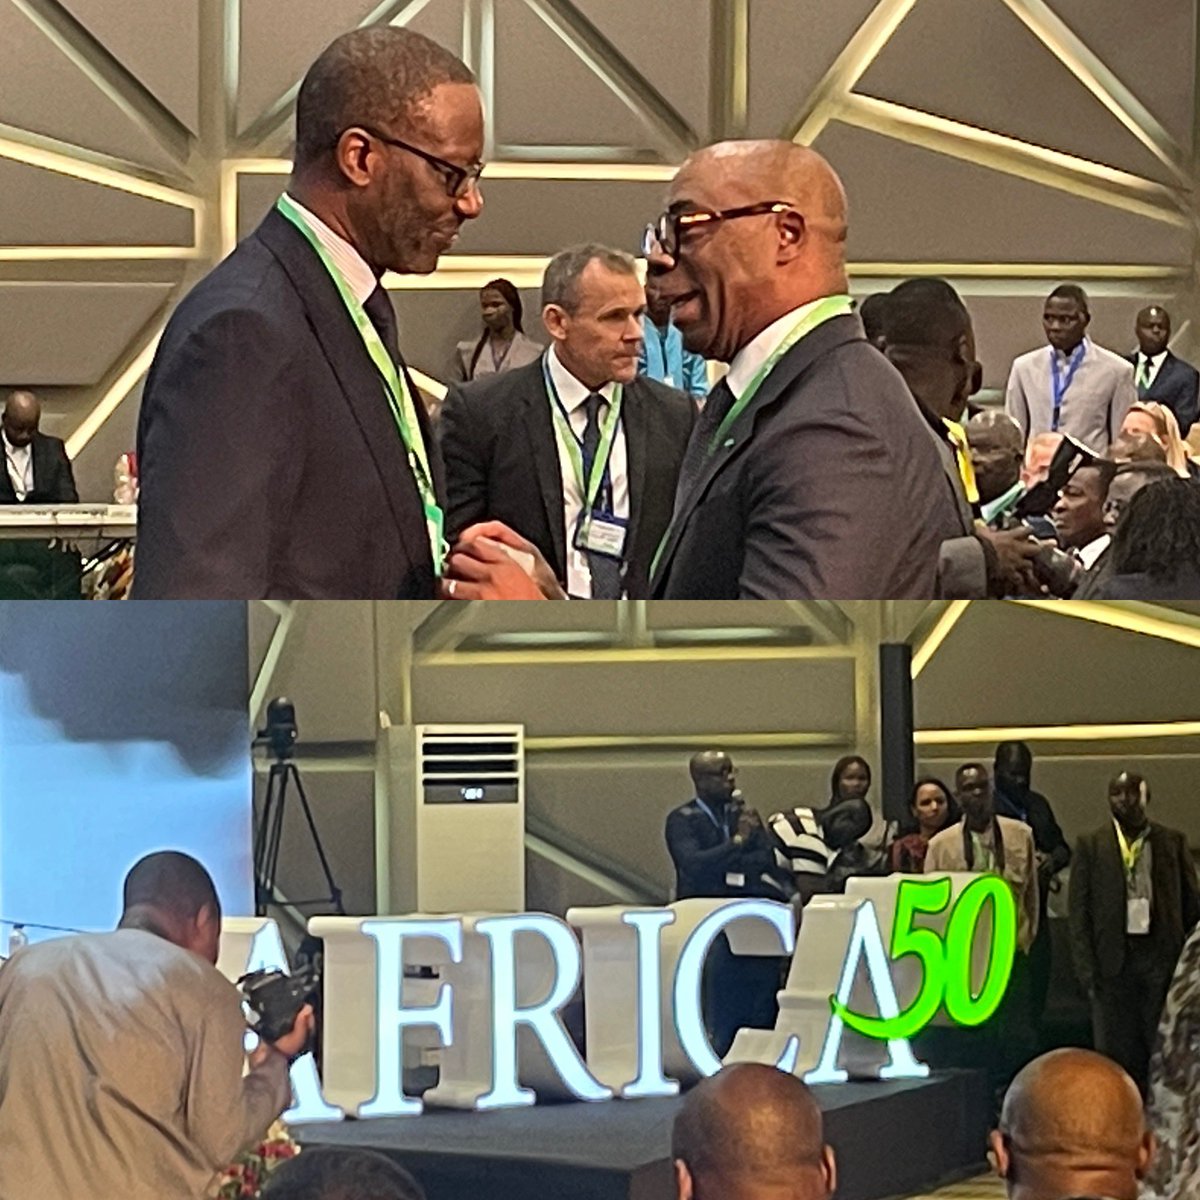 Lome, Togo. #Africa50 Annual Meeting. Former @CreditSuisse Boss Tidjane Thiam takes center stage to share his views on deploying African Capital to solve for AFRICA’s challenges.